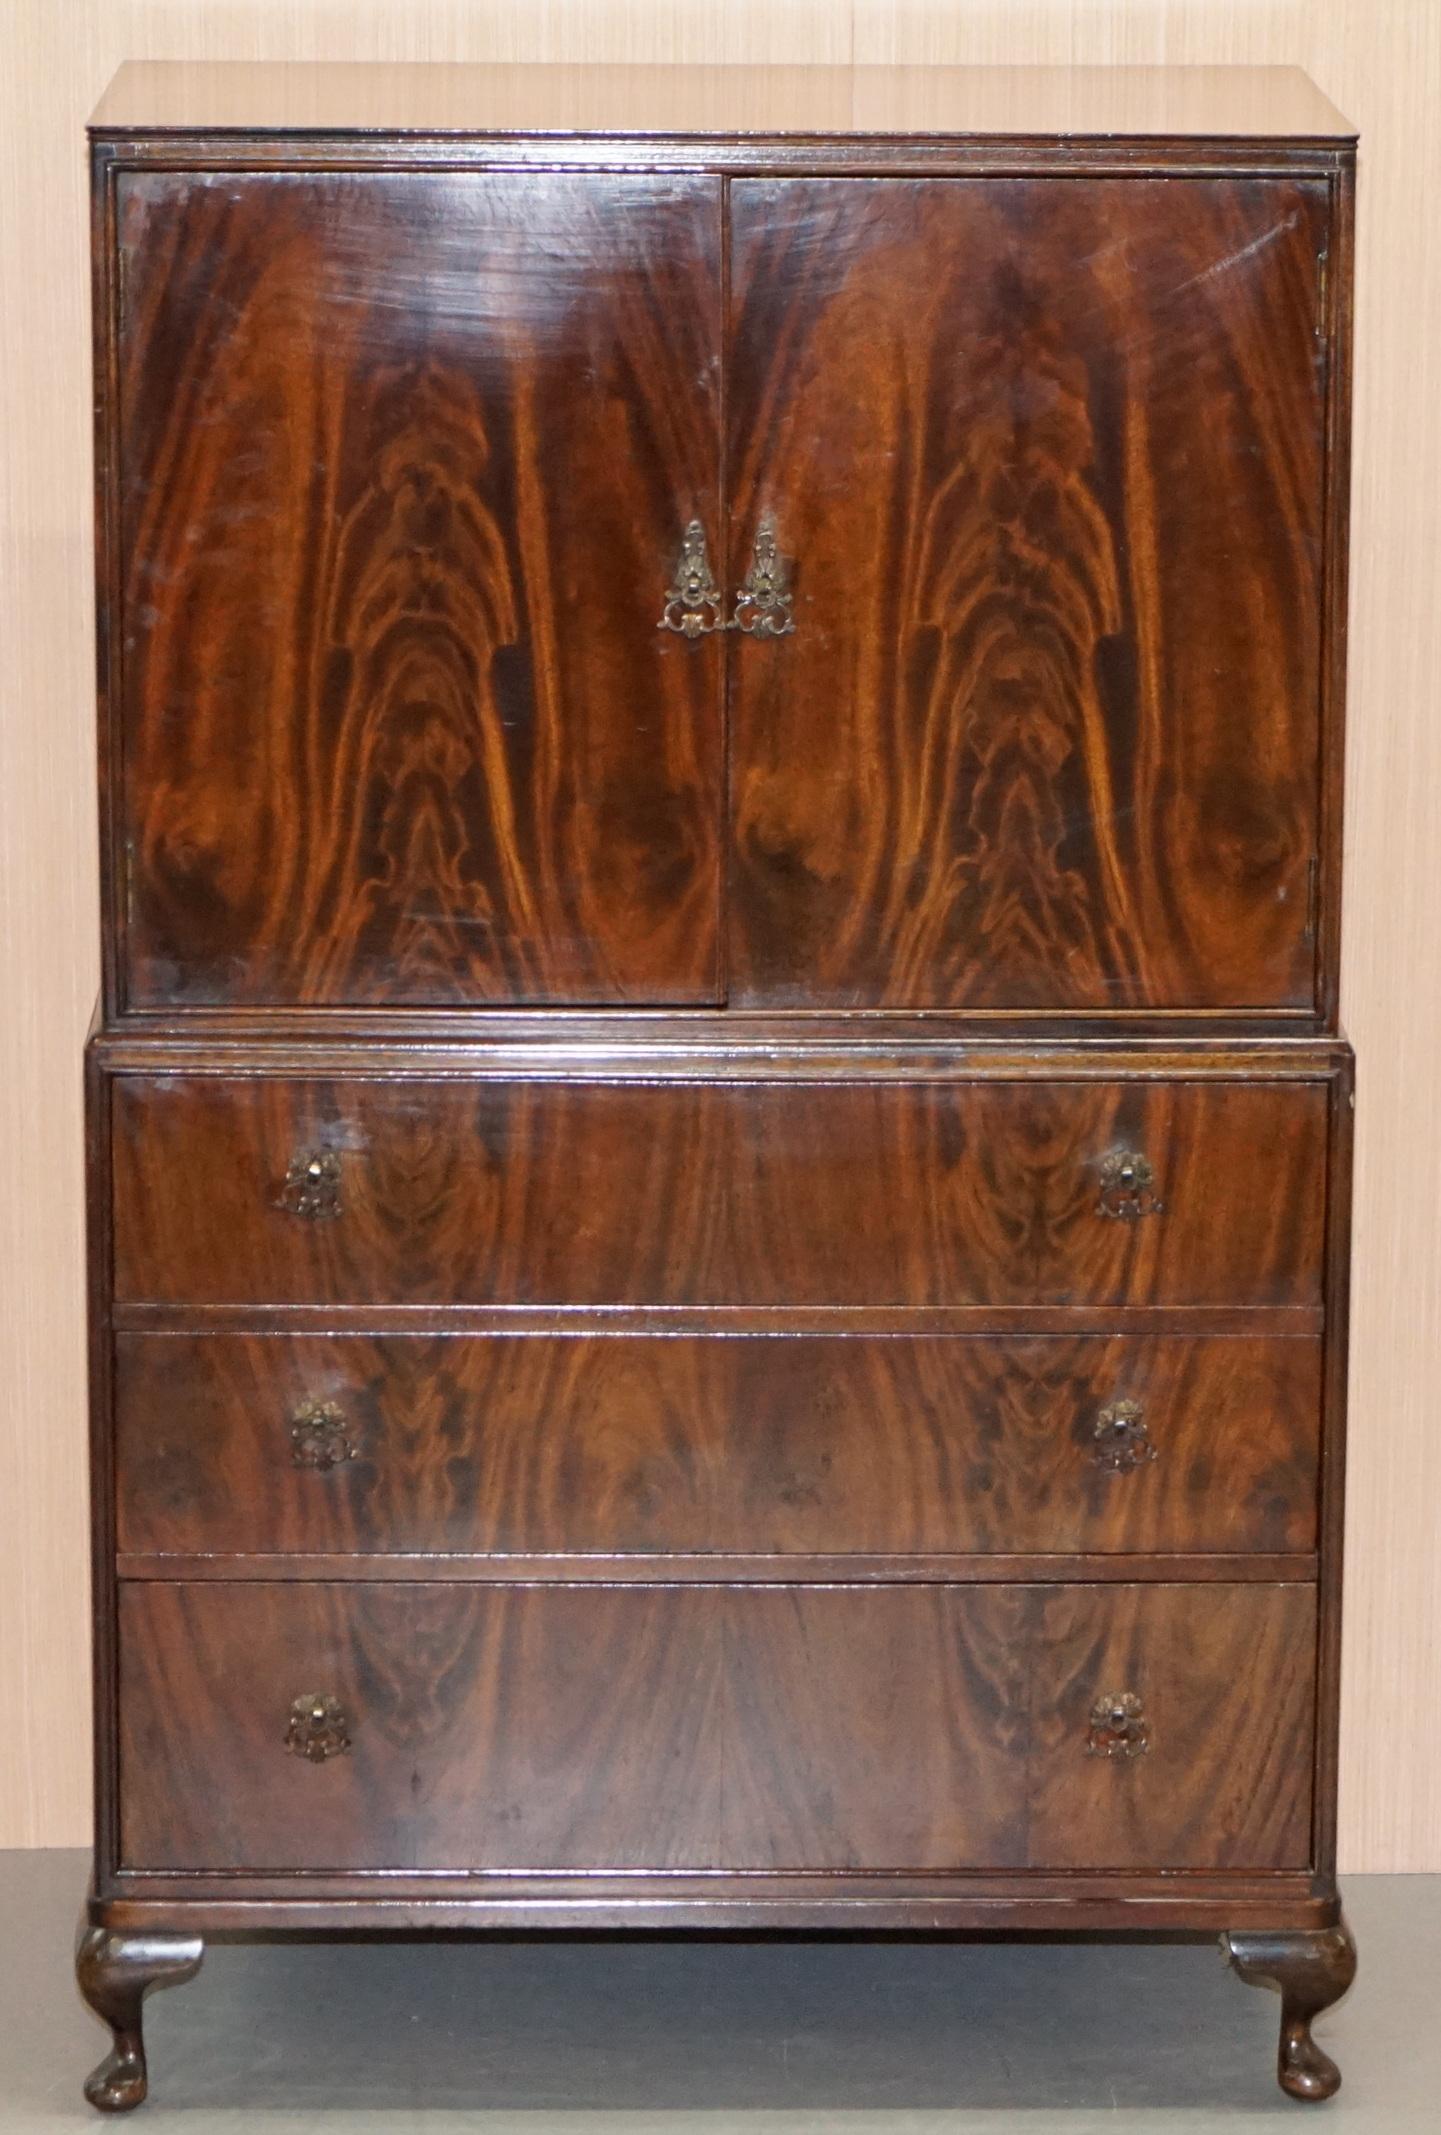 We are delighted to offer for sale this stunning Beithcraft Scotland flamed mahogany tallboy chest of drawers which is part of a suite

This is as mentioned part of a suite, I also have a small wardrobe, a very large double bank wardrobe and a